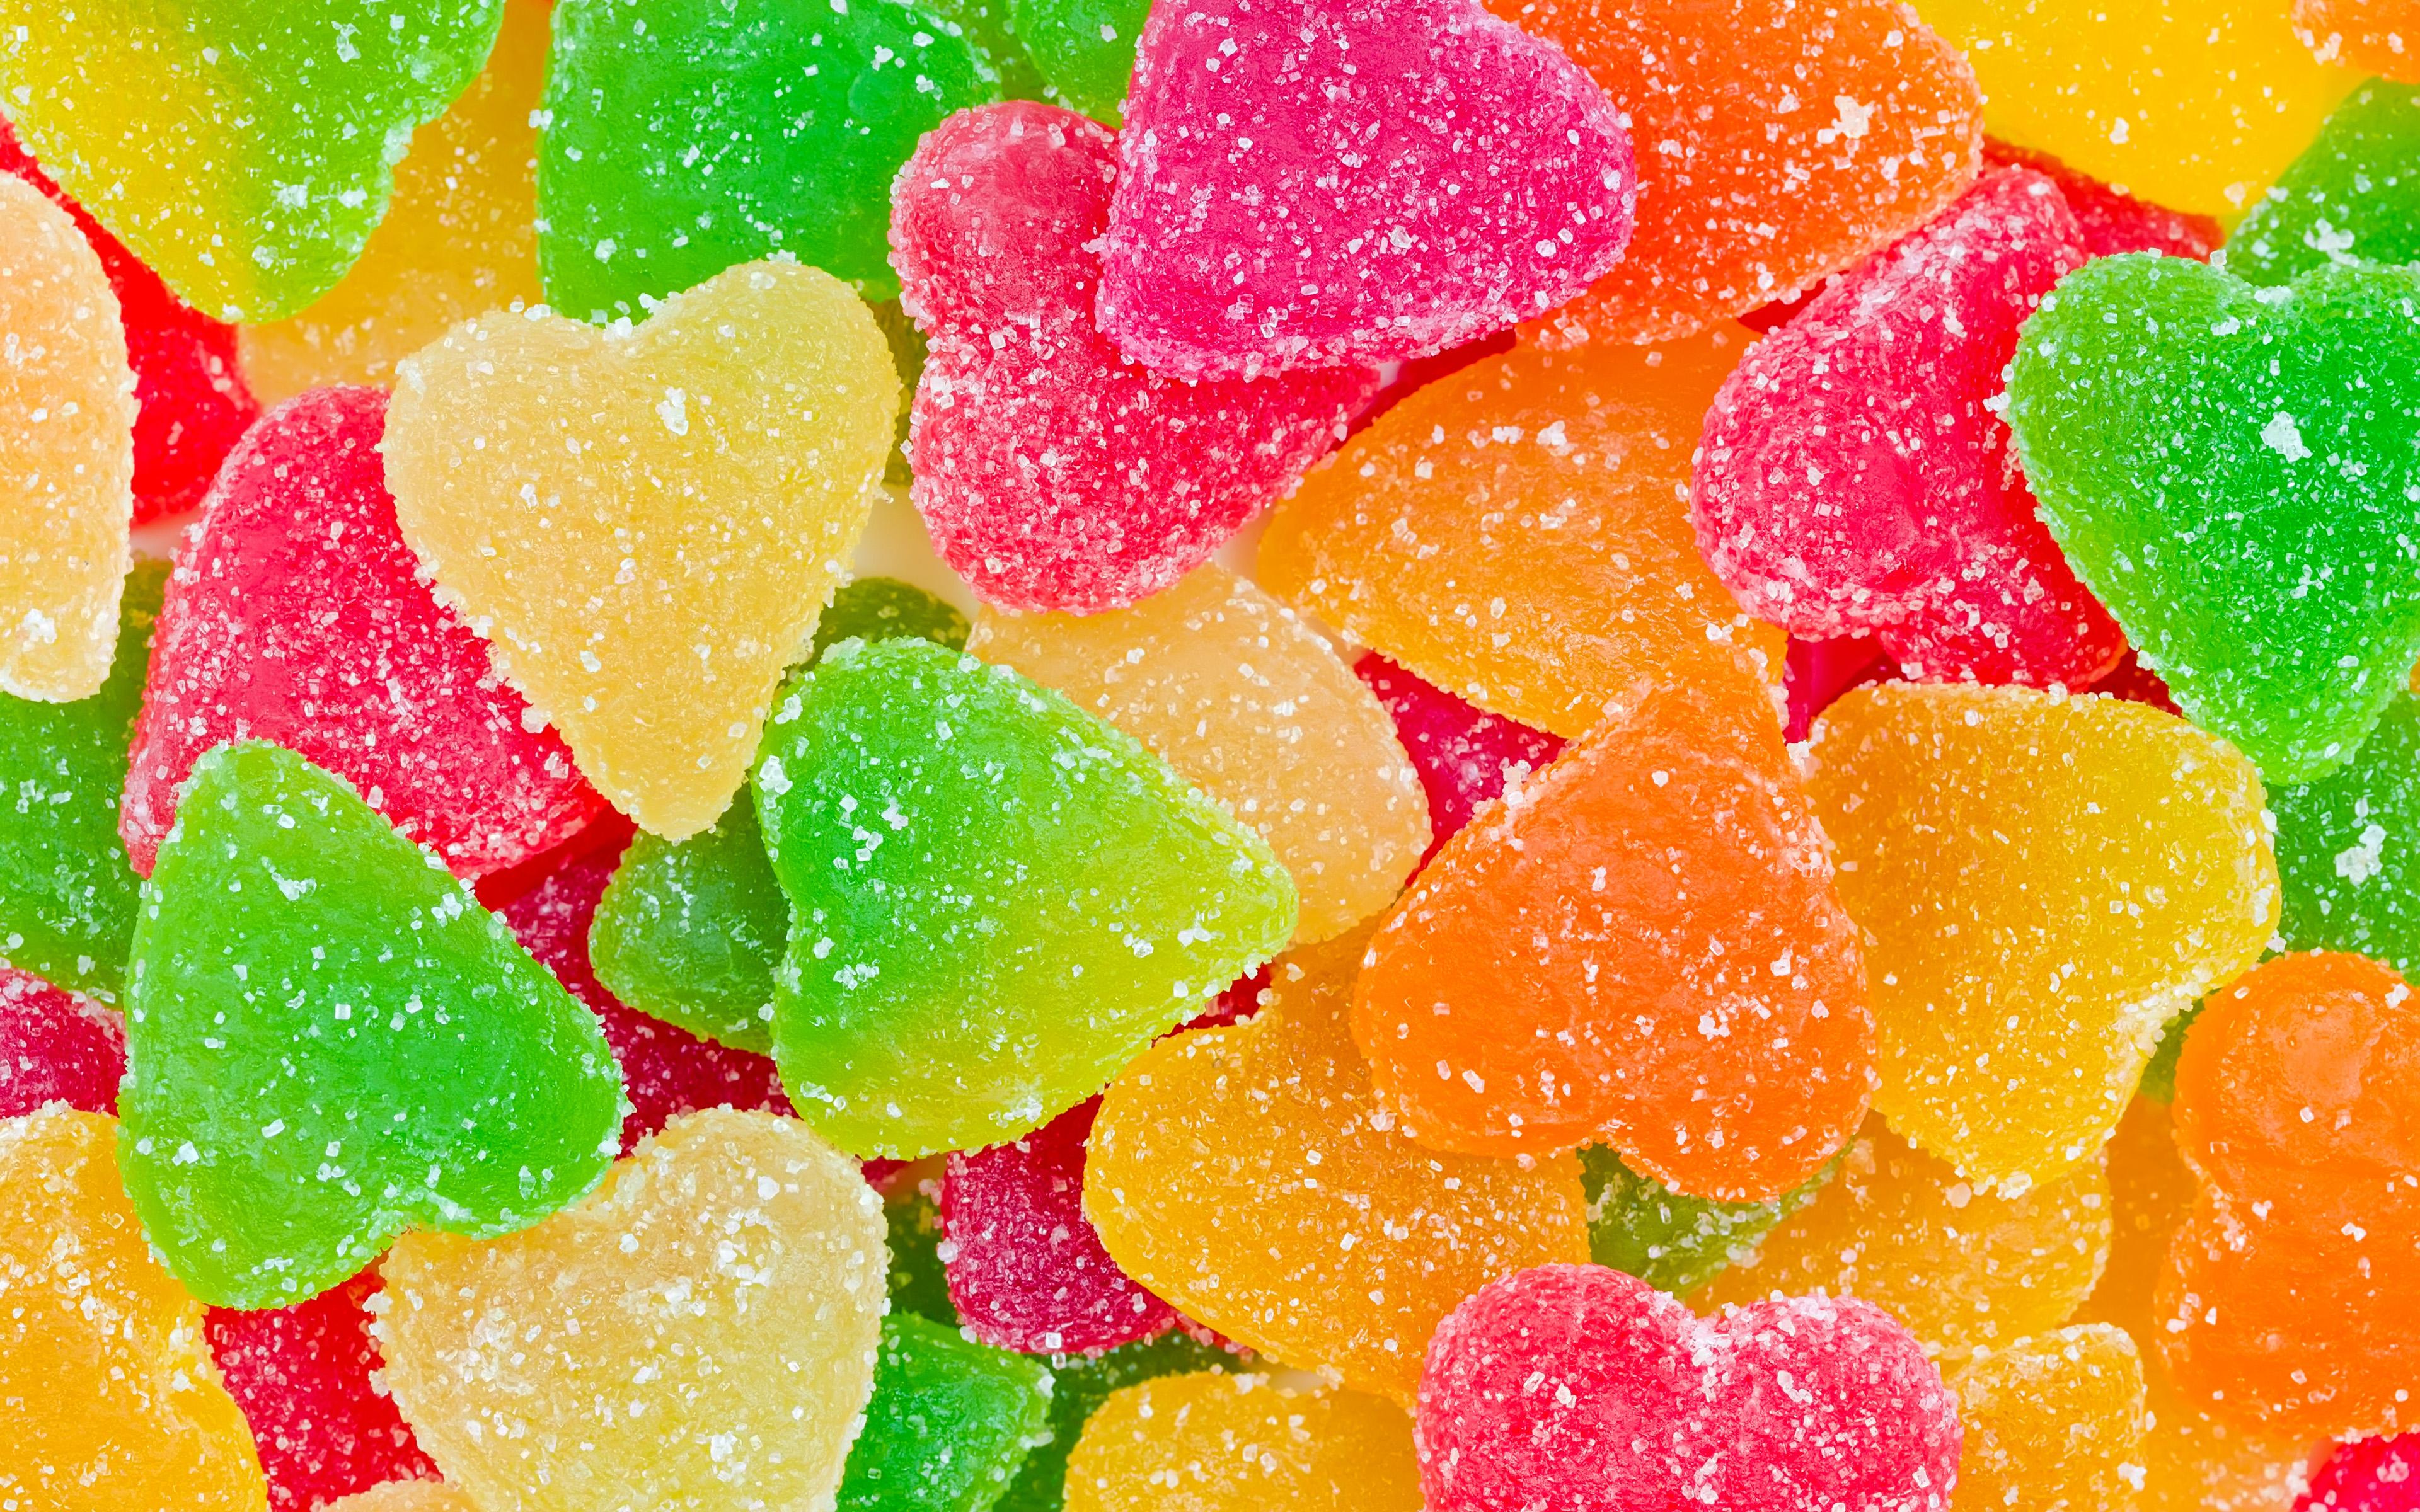 #Sweet, #Sugar, #Colorful, K, #Candy. Photography